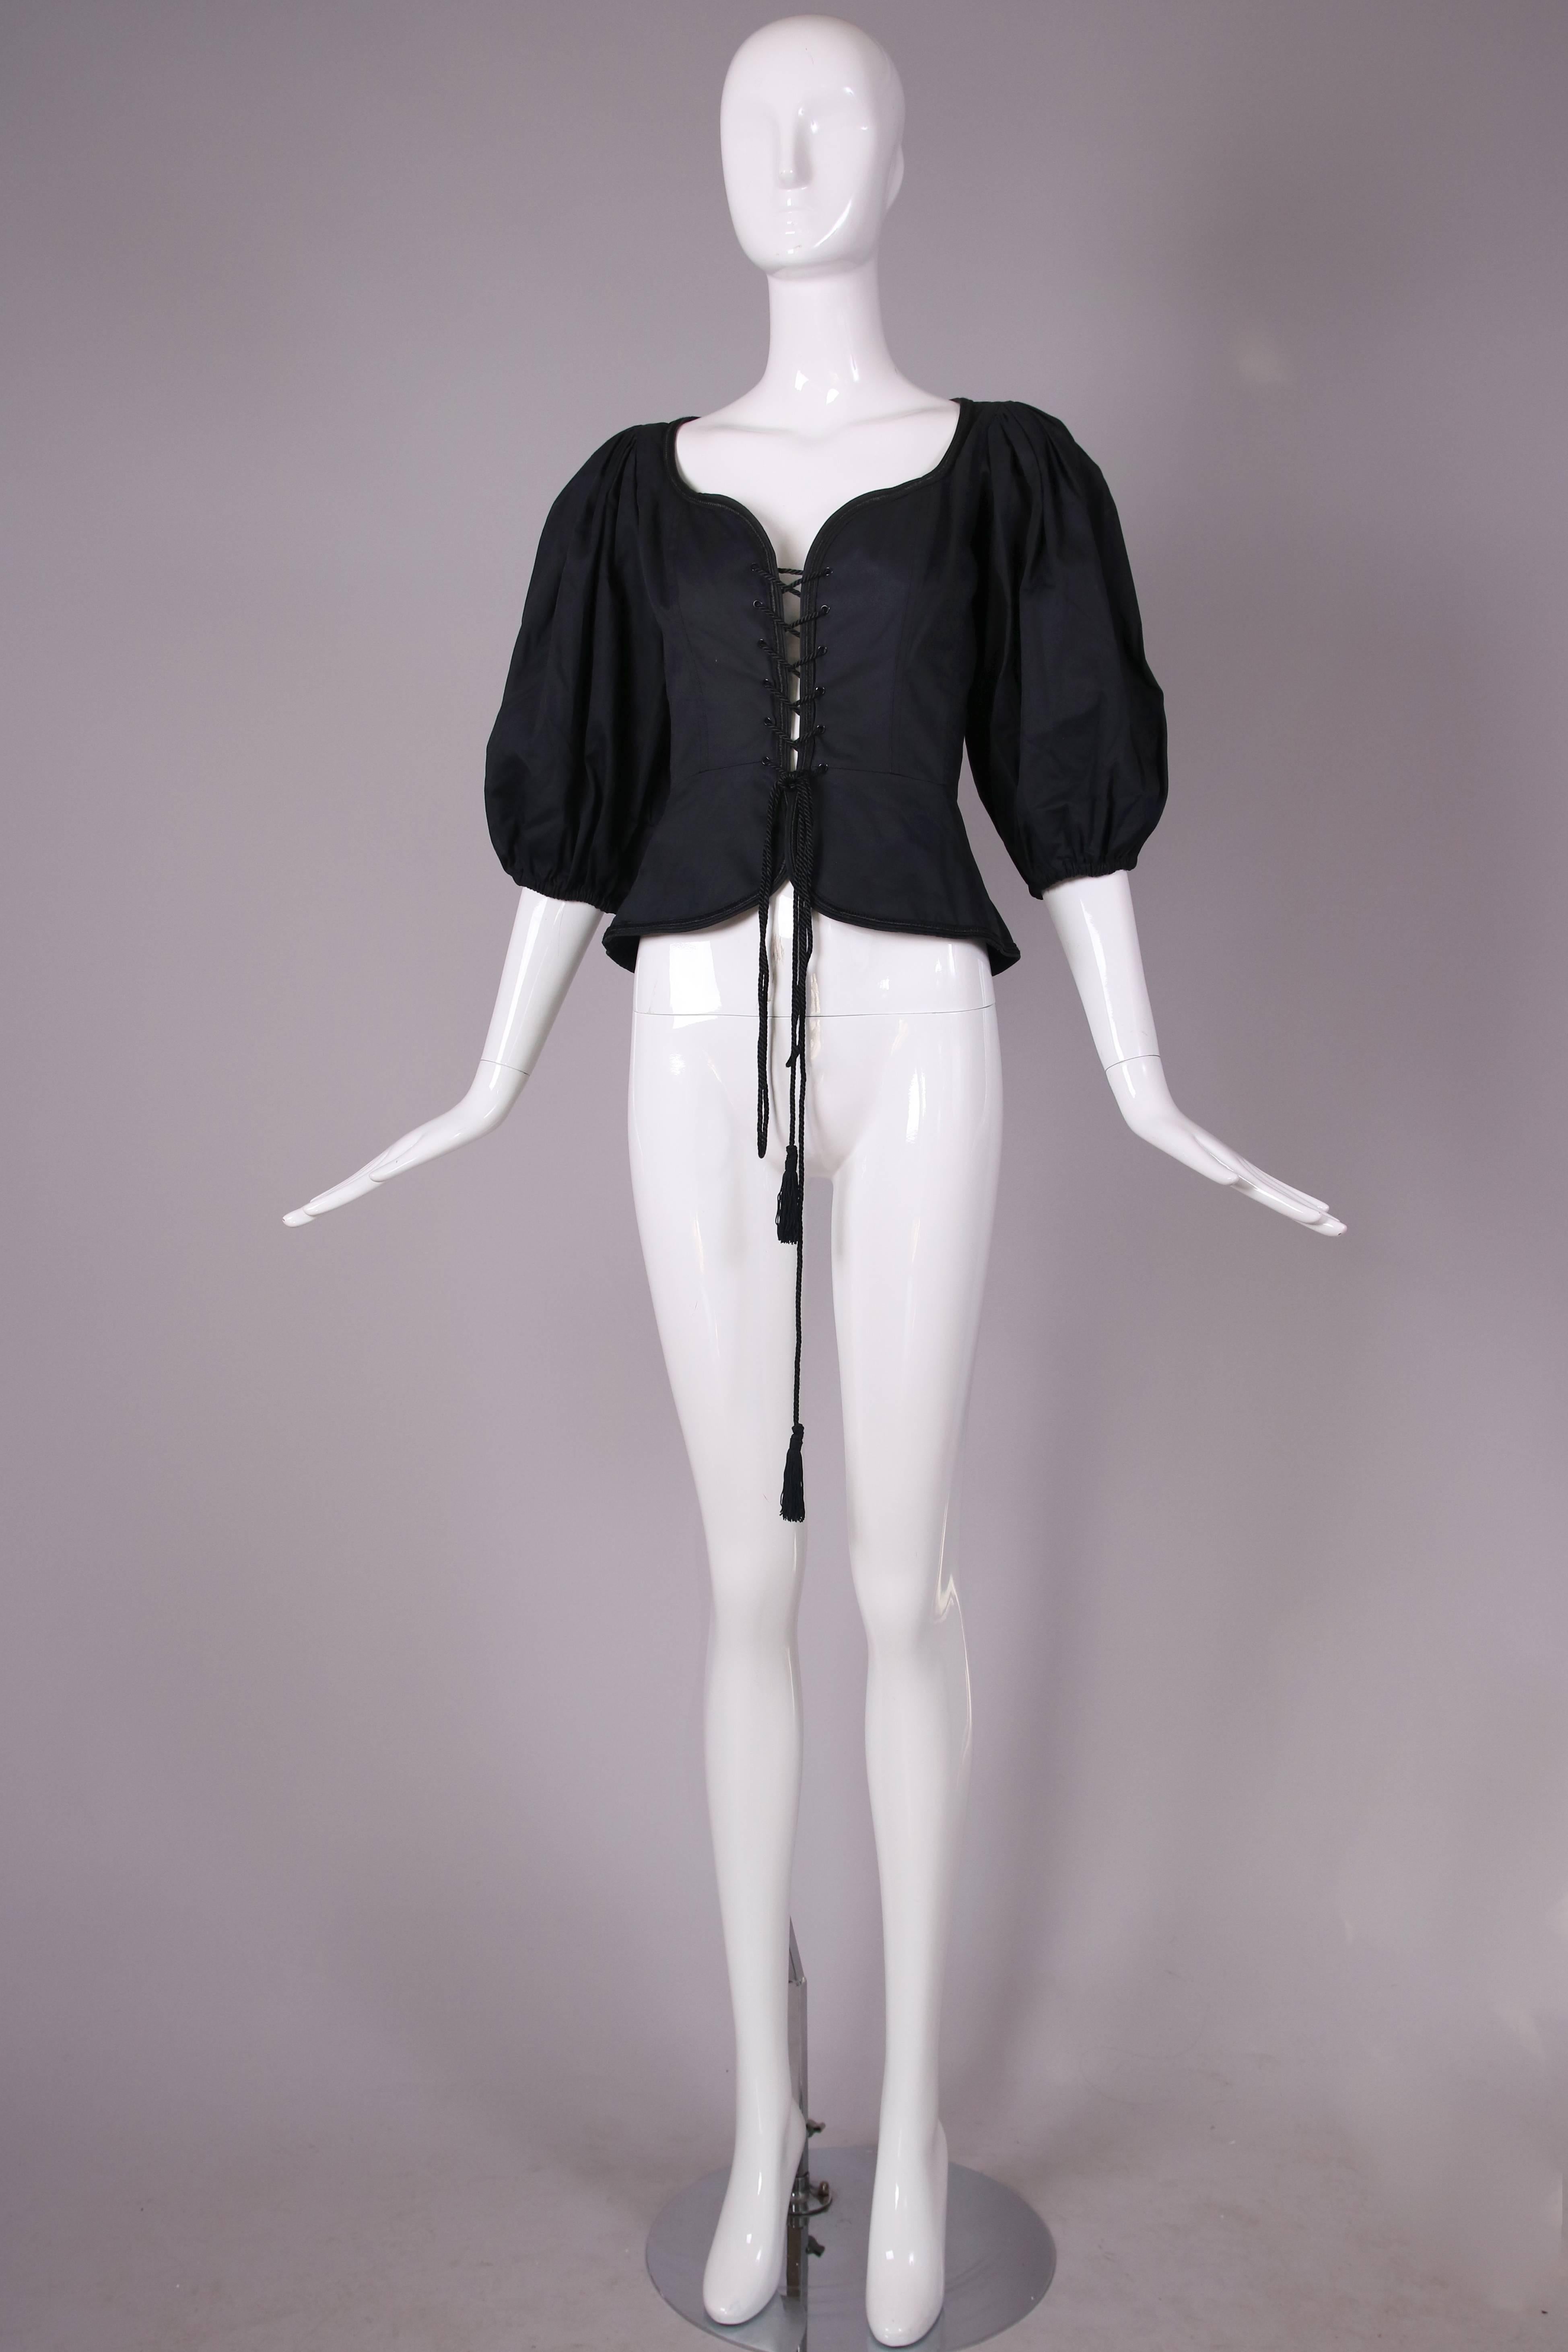 Women's 1970's Yves Saint Laurent Black Cotton Lace Up Peasant Top w/Balloon Sleeves